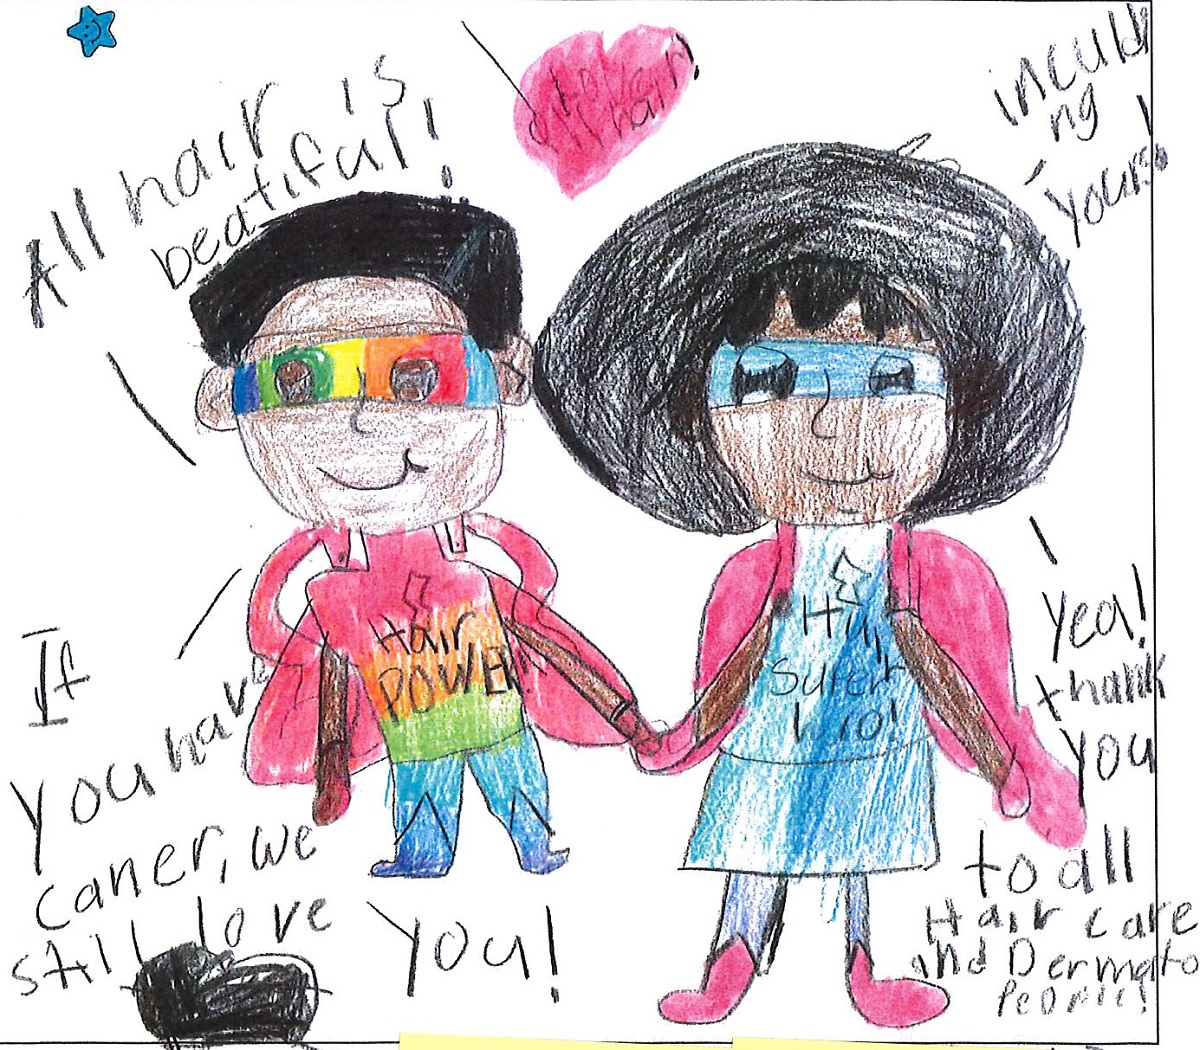 A child’s crayon drawing shows a boy and a girl, both wearing superhero masks, smiling and holding hands. Among the many words written around the figures are “All Hair is Beautiful.”